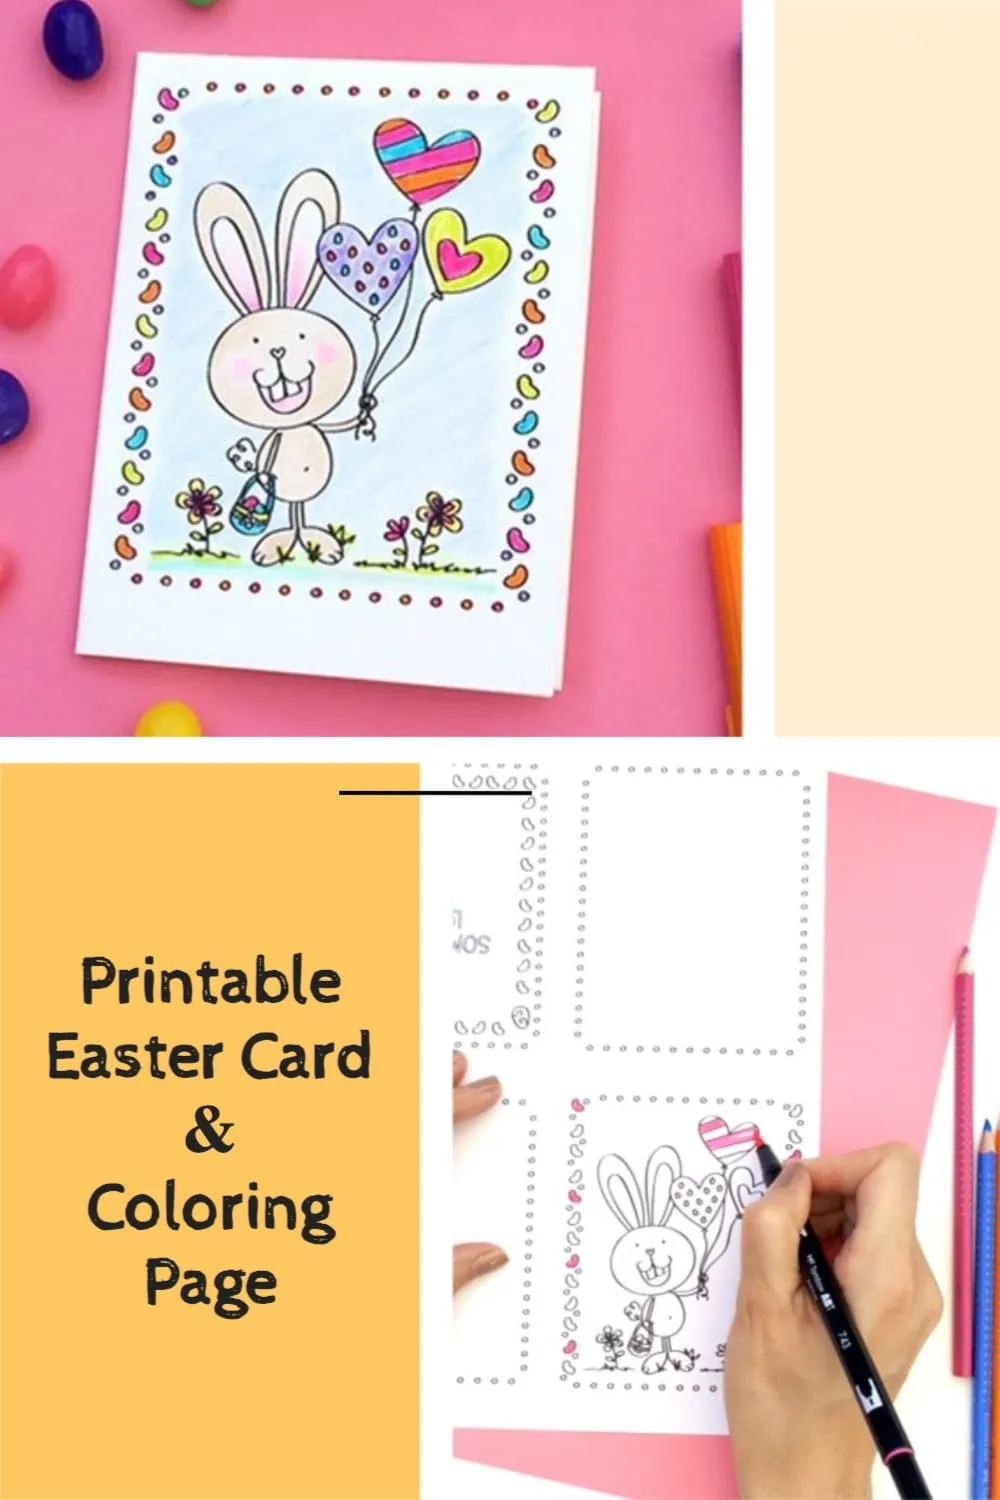 Printable Easter card and coloring page featuring a cute Easter bunny with balloons